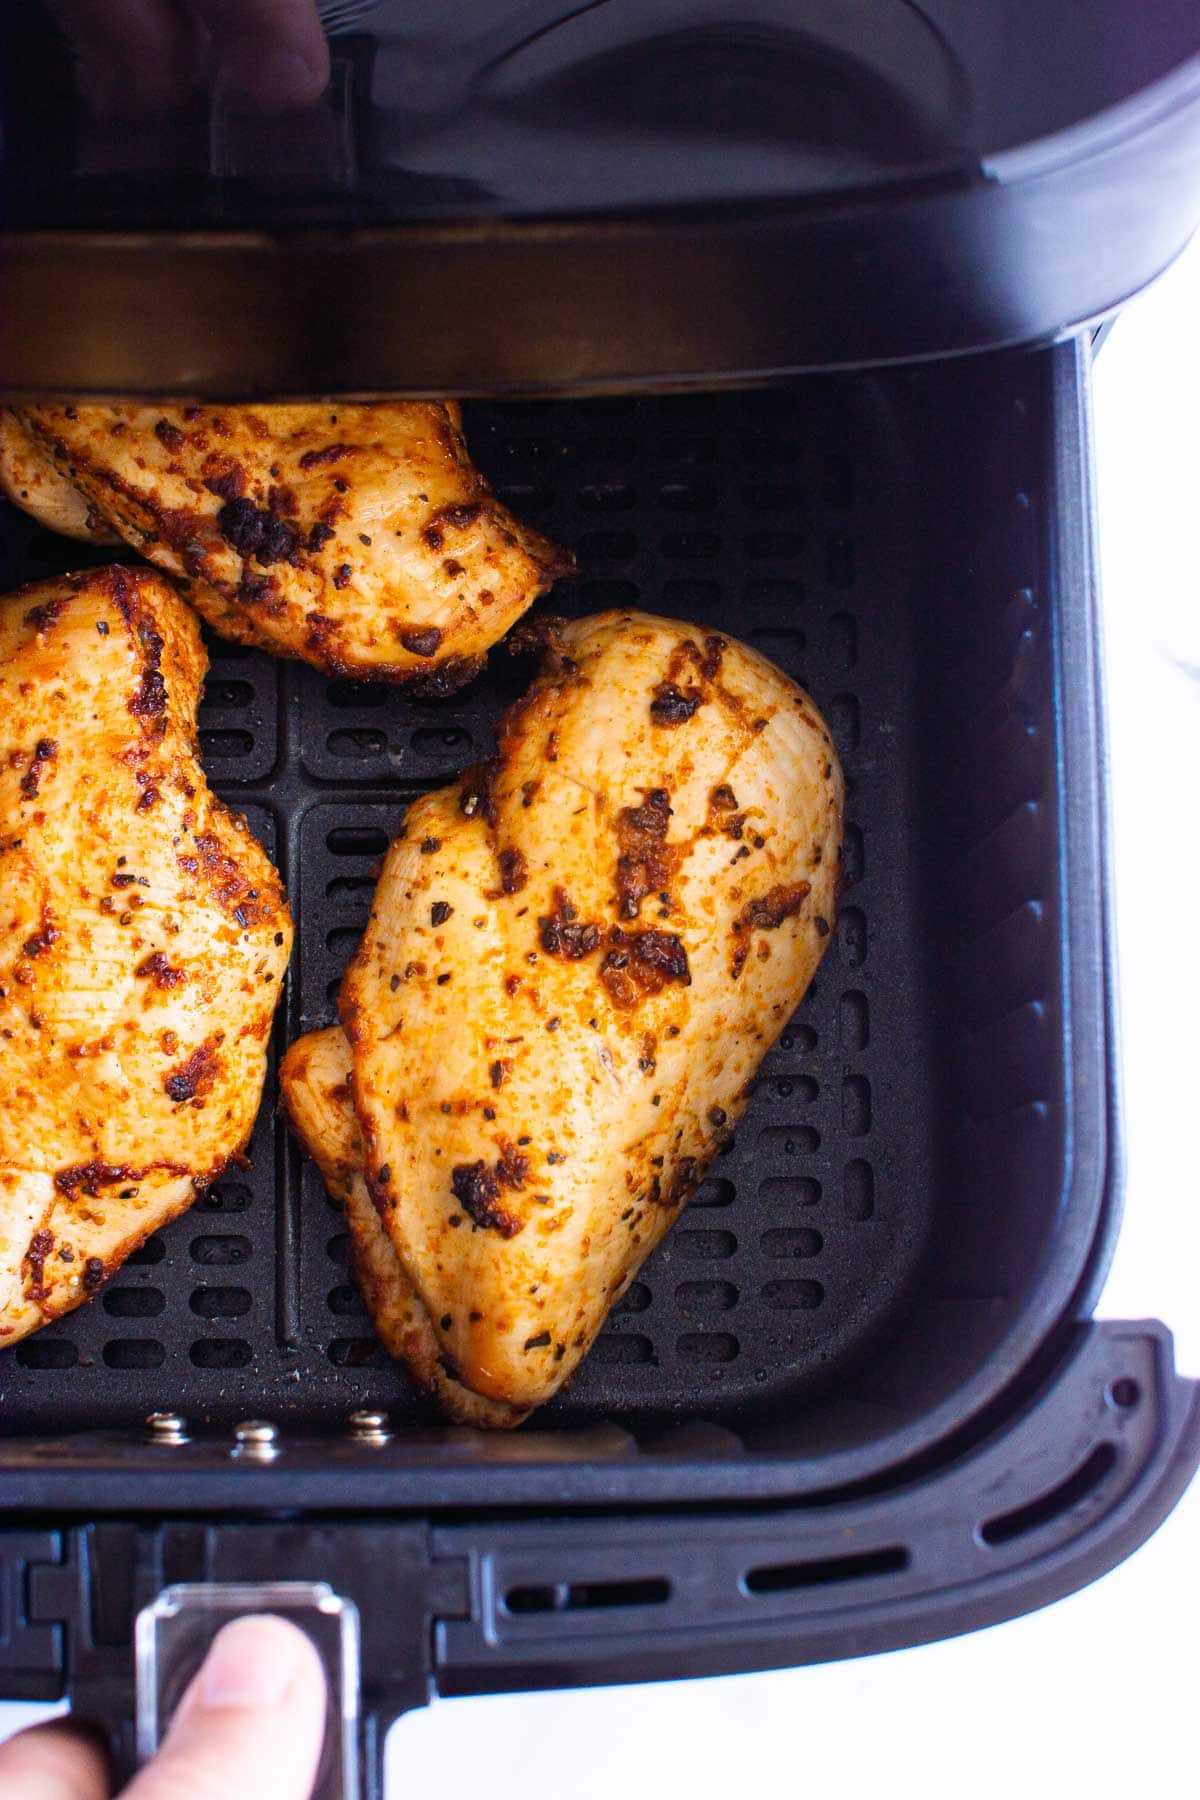 Three cooked chicken breasts in air fryer basket.